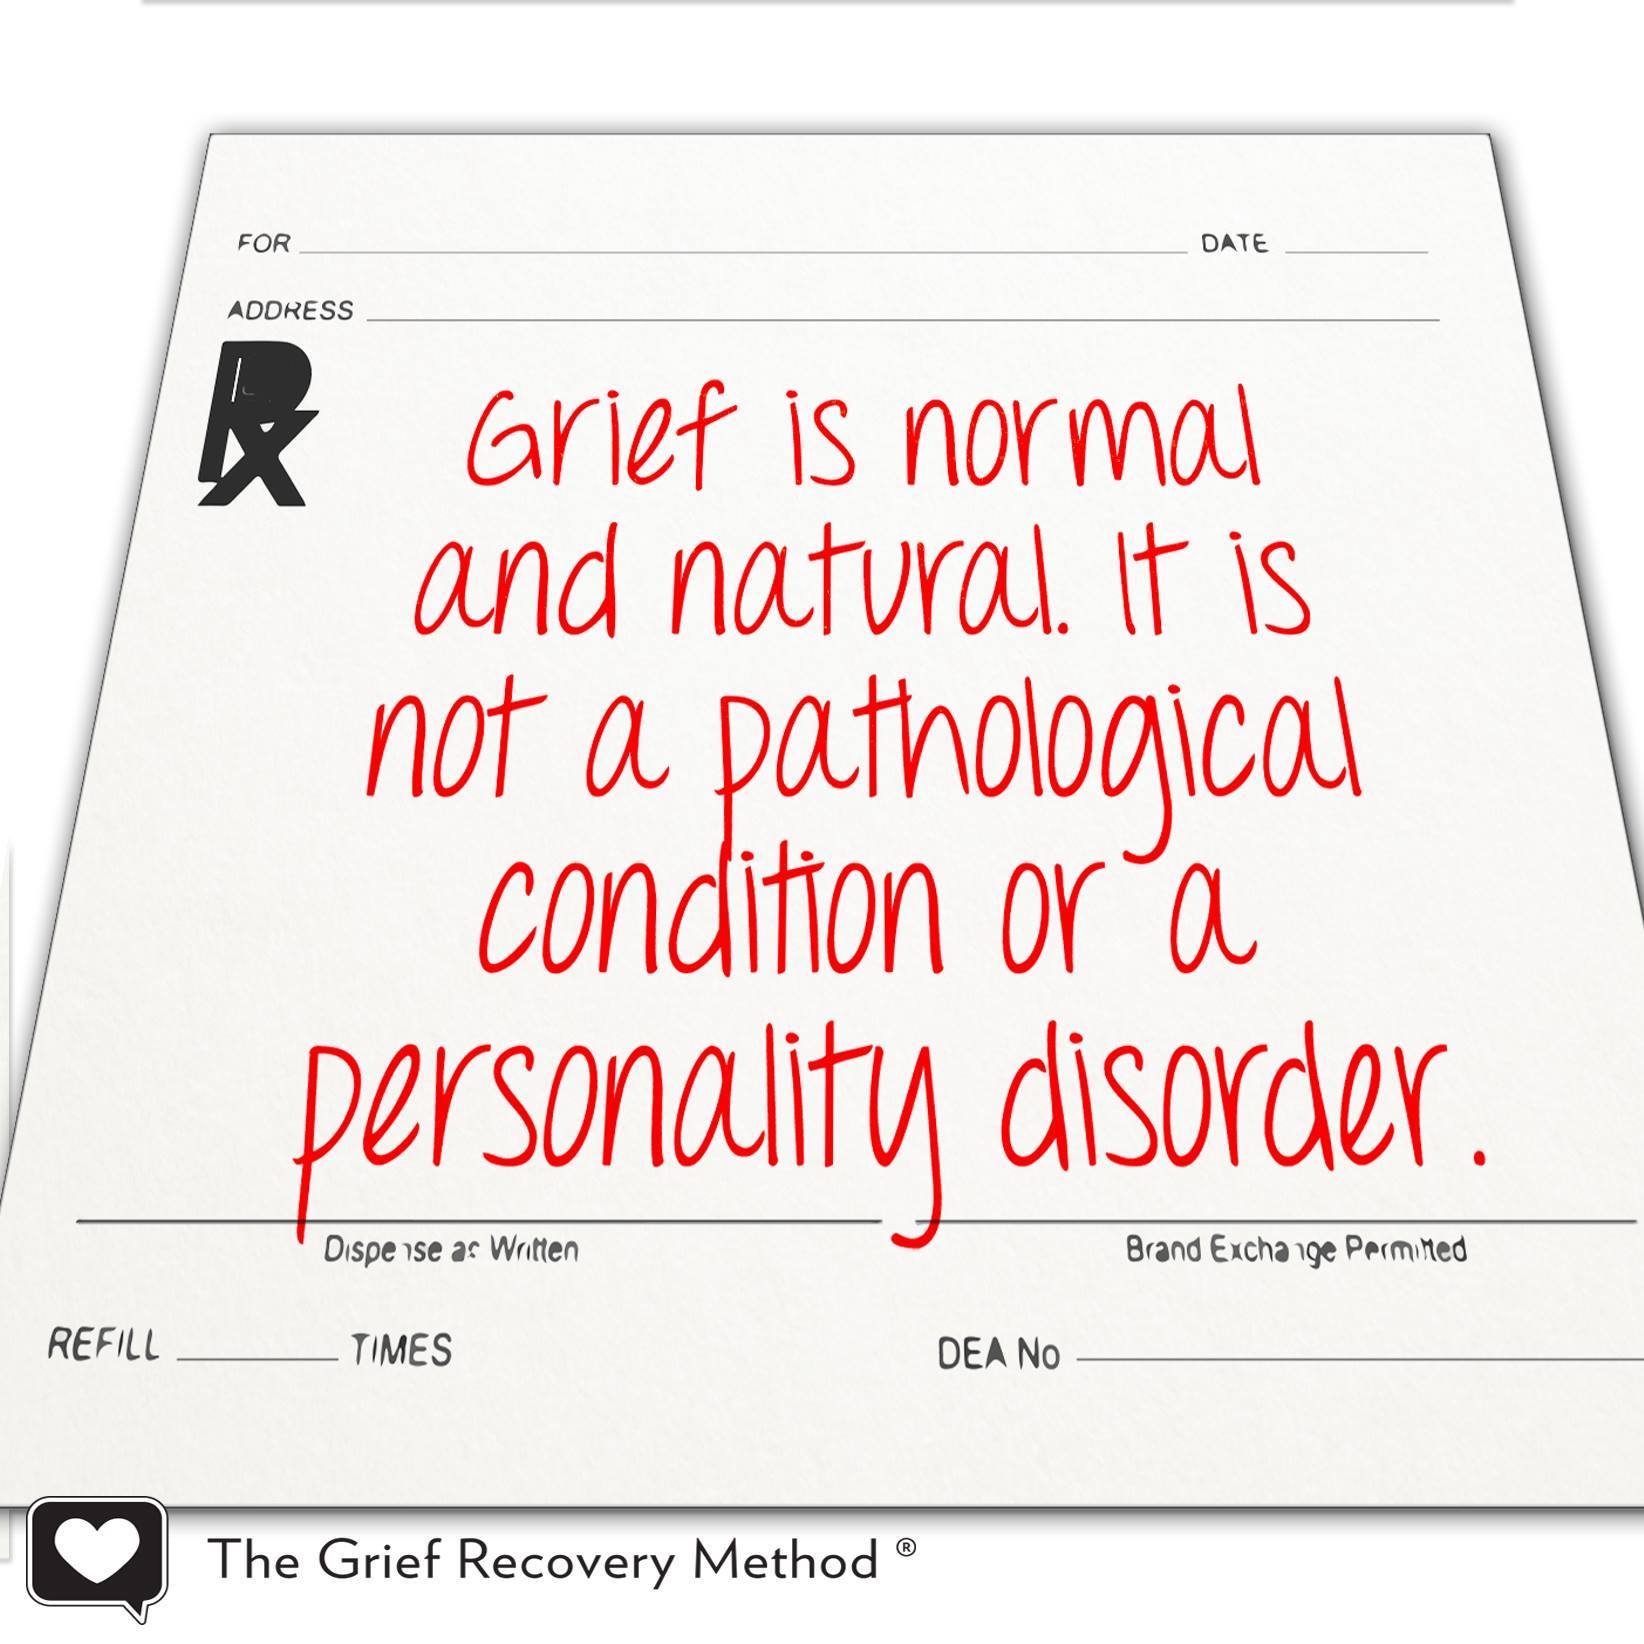 grief is normal and natural not pathological condition or disorder.jpg